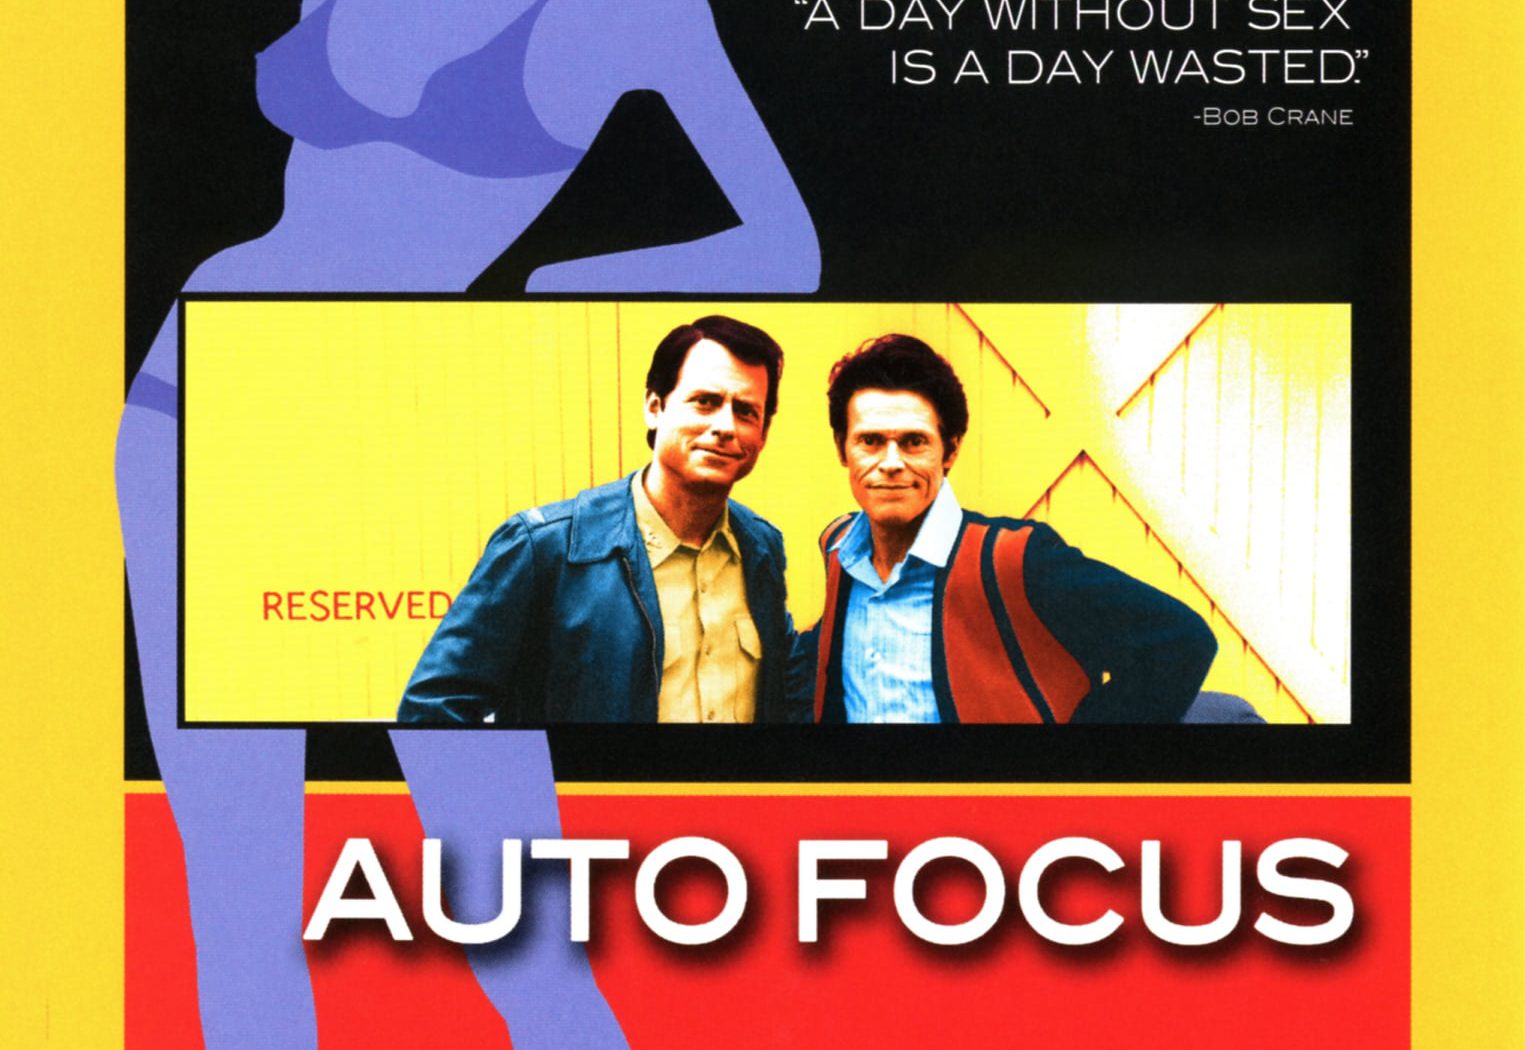 Poster for the movie "Auto Focus"